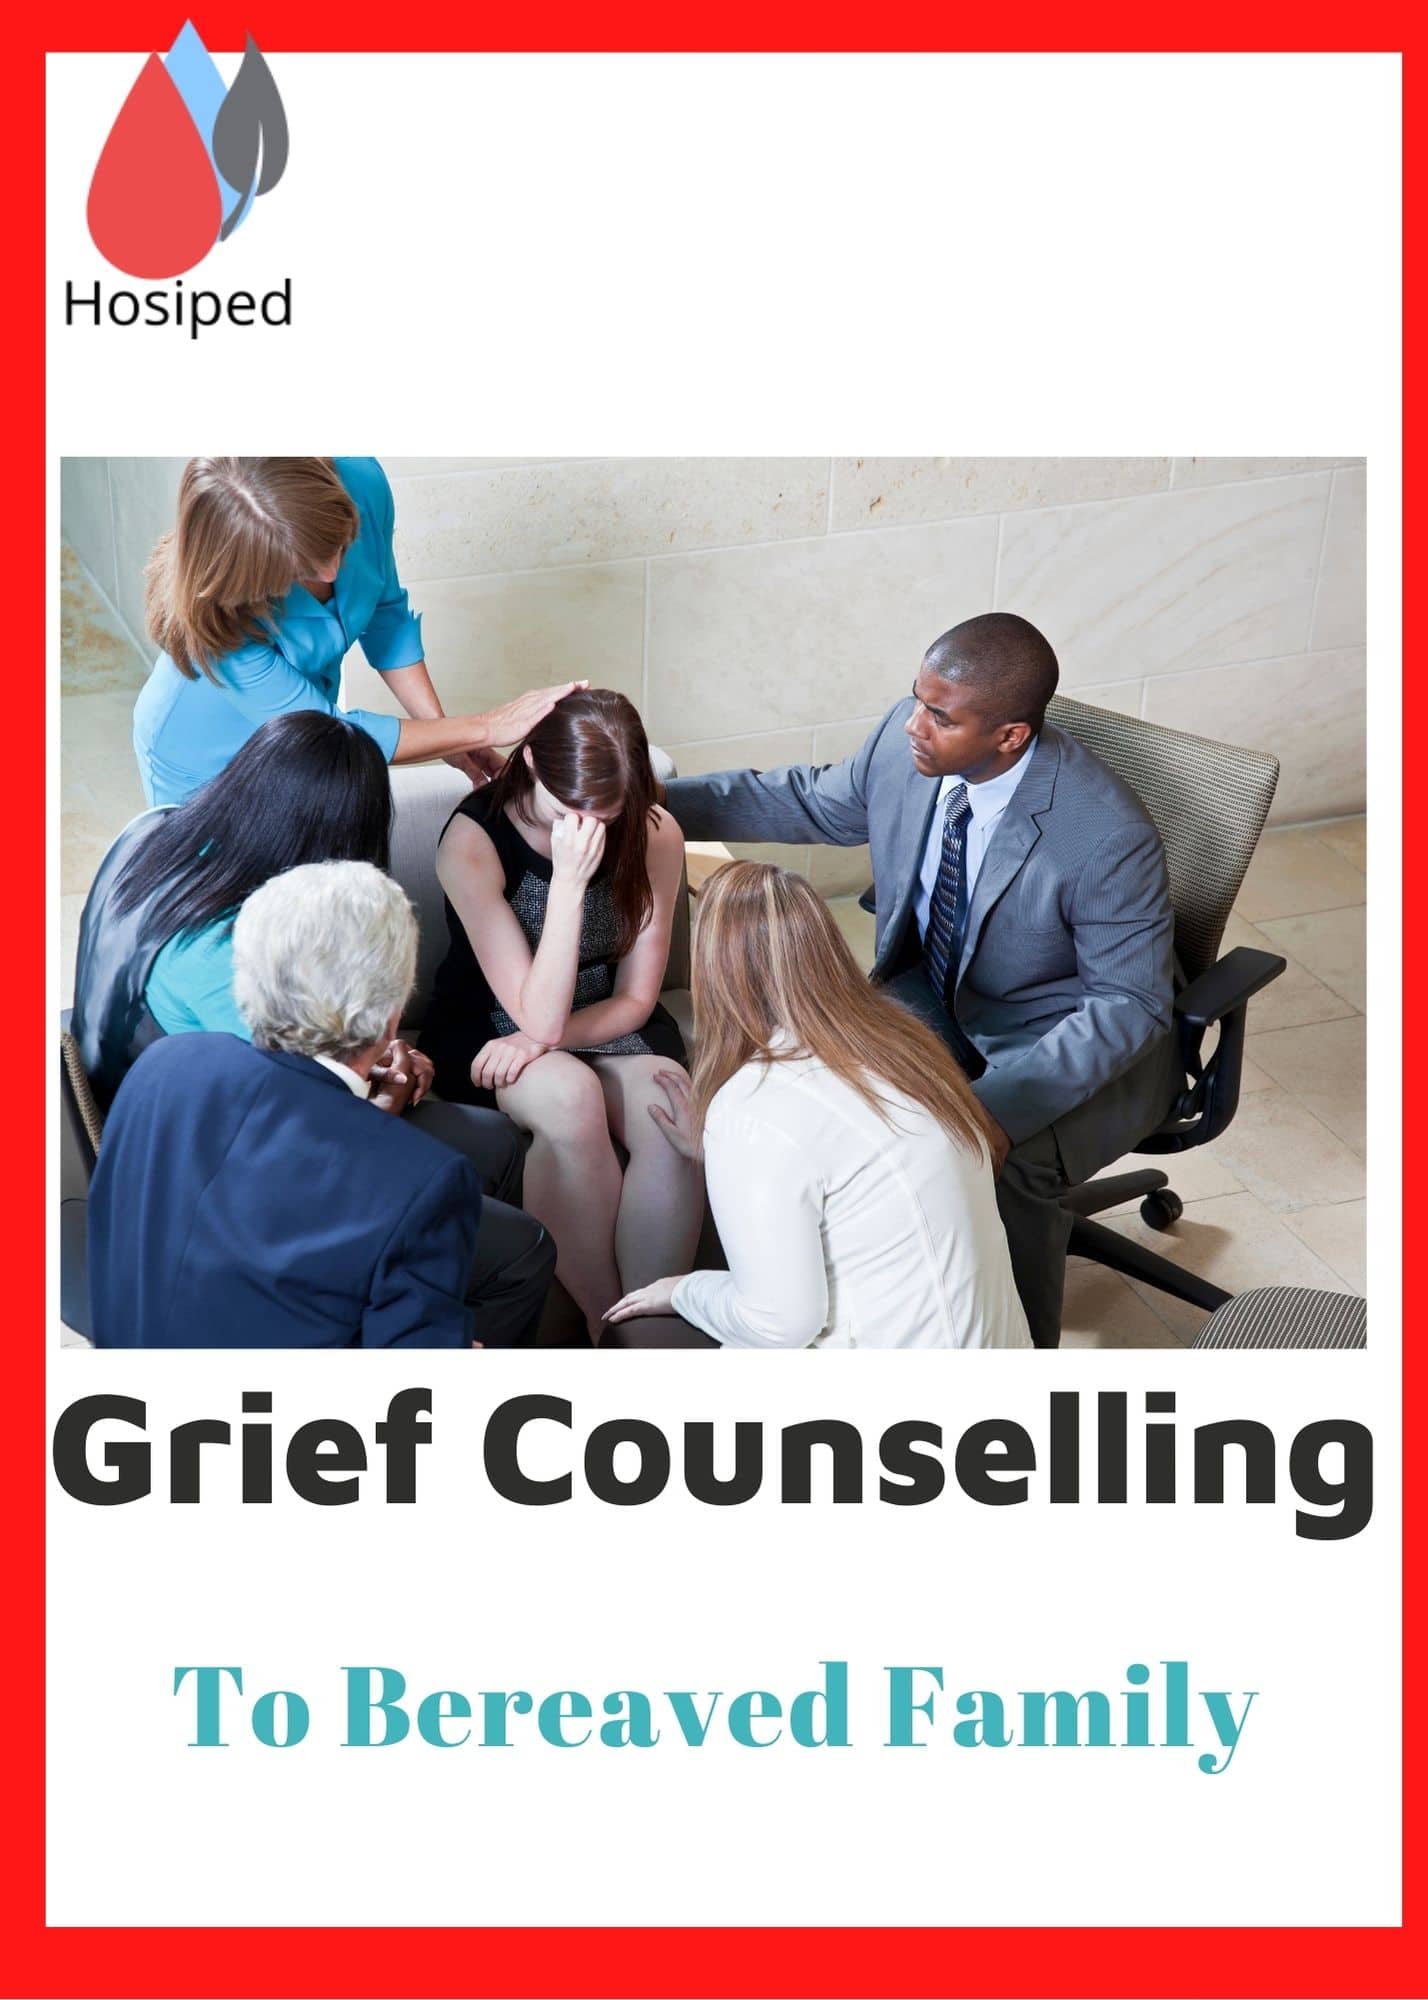 Picture shows grief counselling for bereaved family